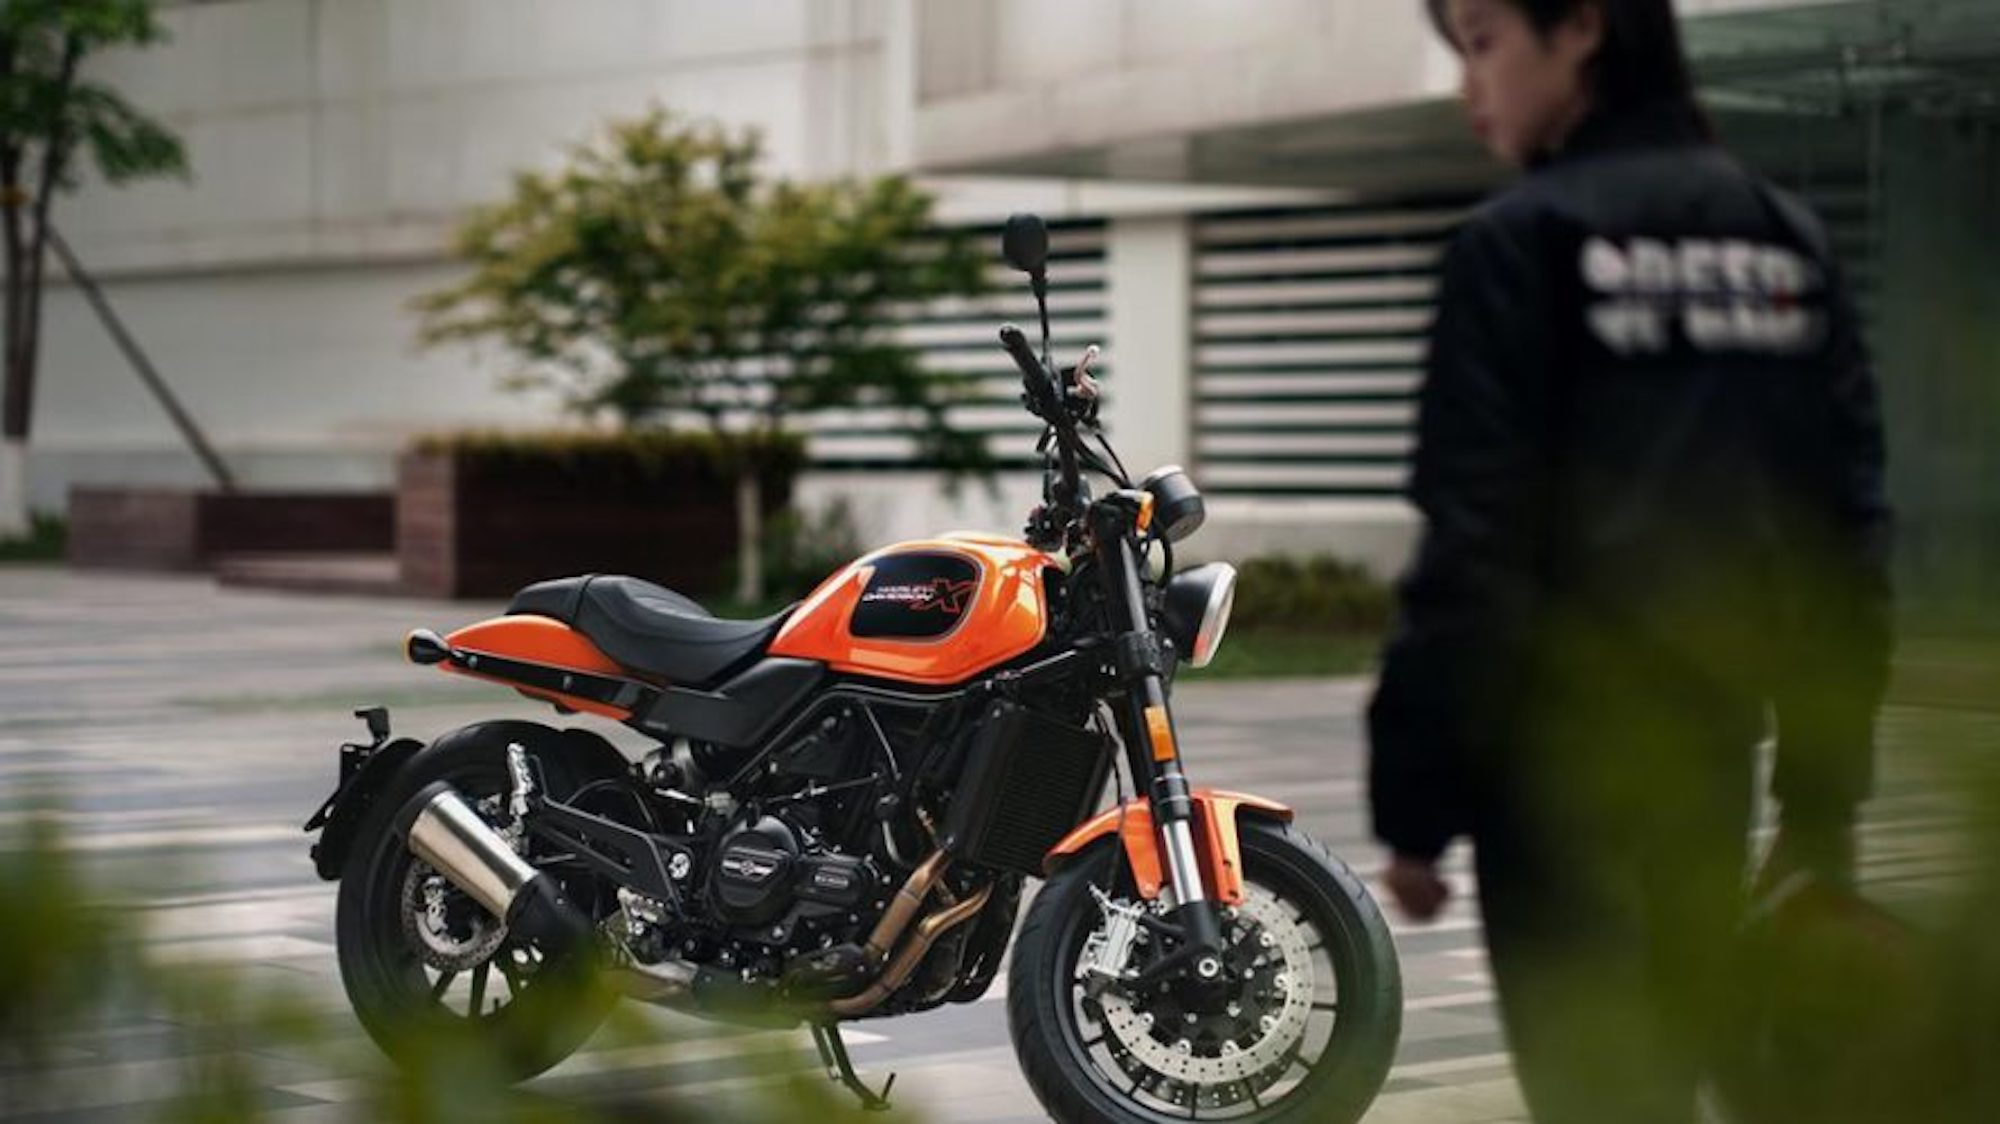 A view of Harley-Davidson's X500, created in collaboration with efforts from QJ Motors. Media sourced from ADVRider.